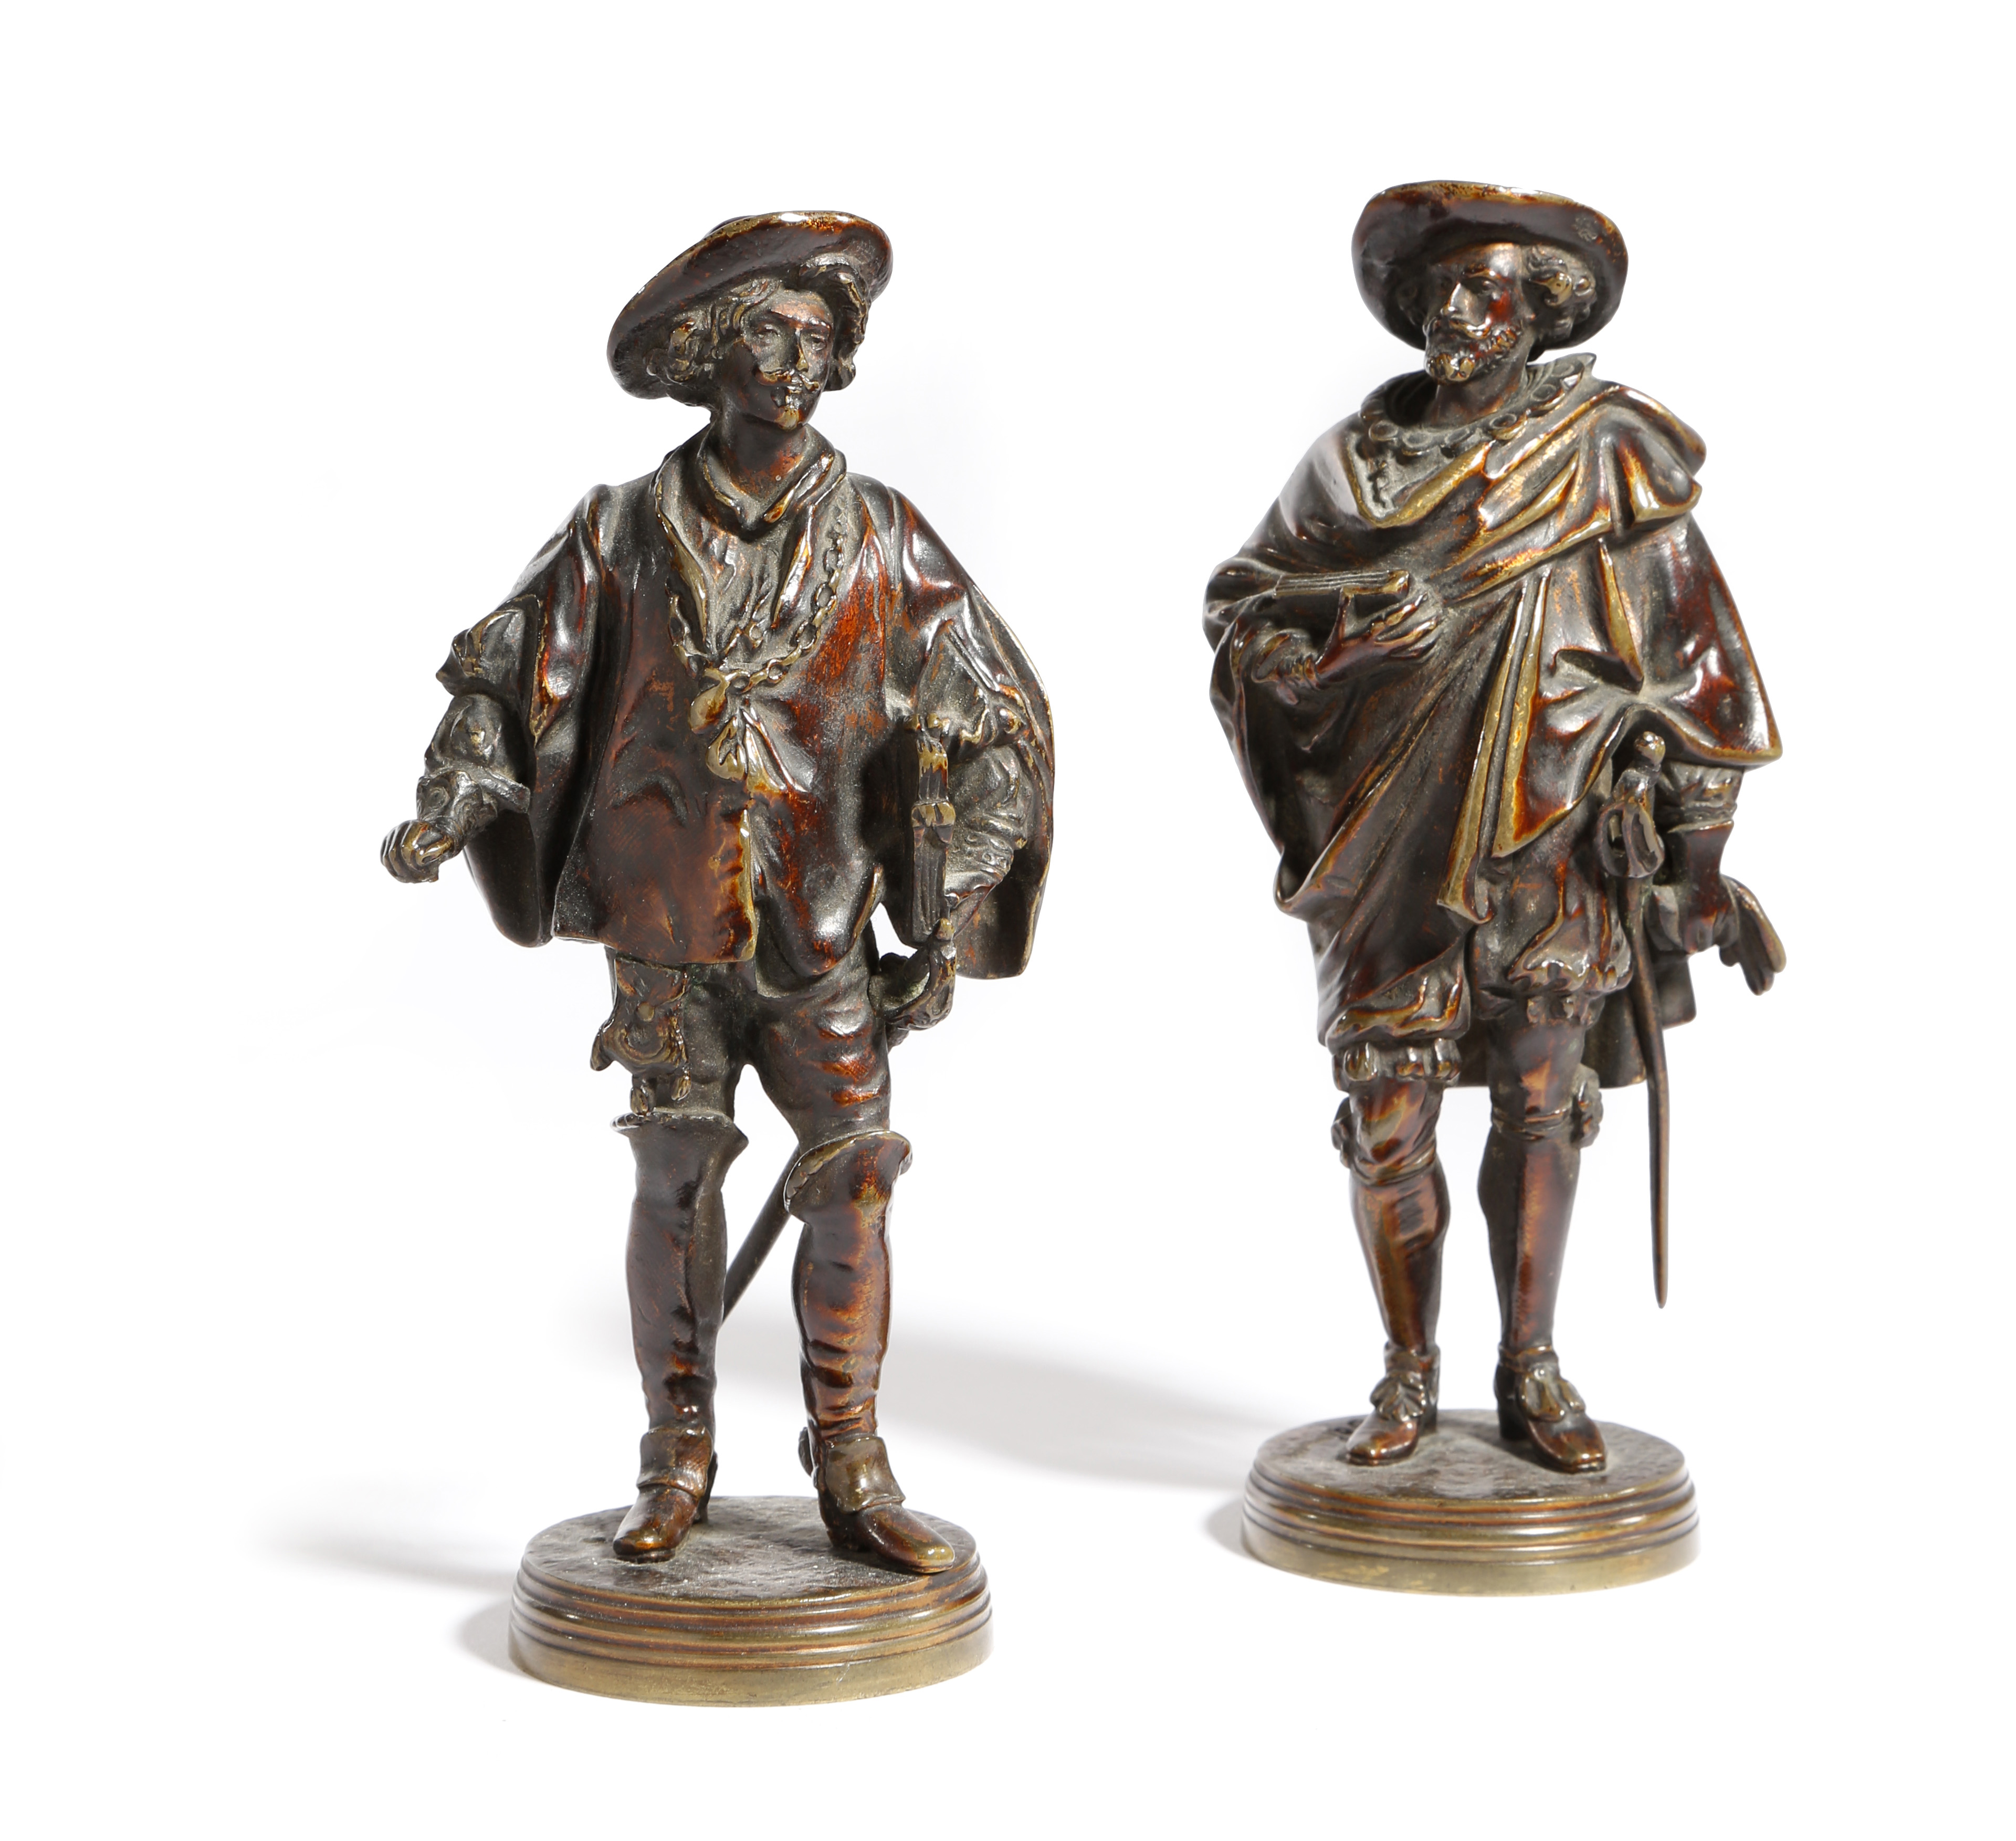 A PAIR OF BRONZE FIGURES BY JEAN JULES SALMSON (FRENCH 1823-1903) of Peter Paul Rubens and Anthony